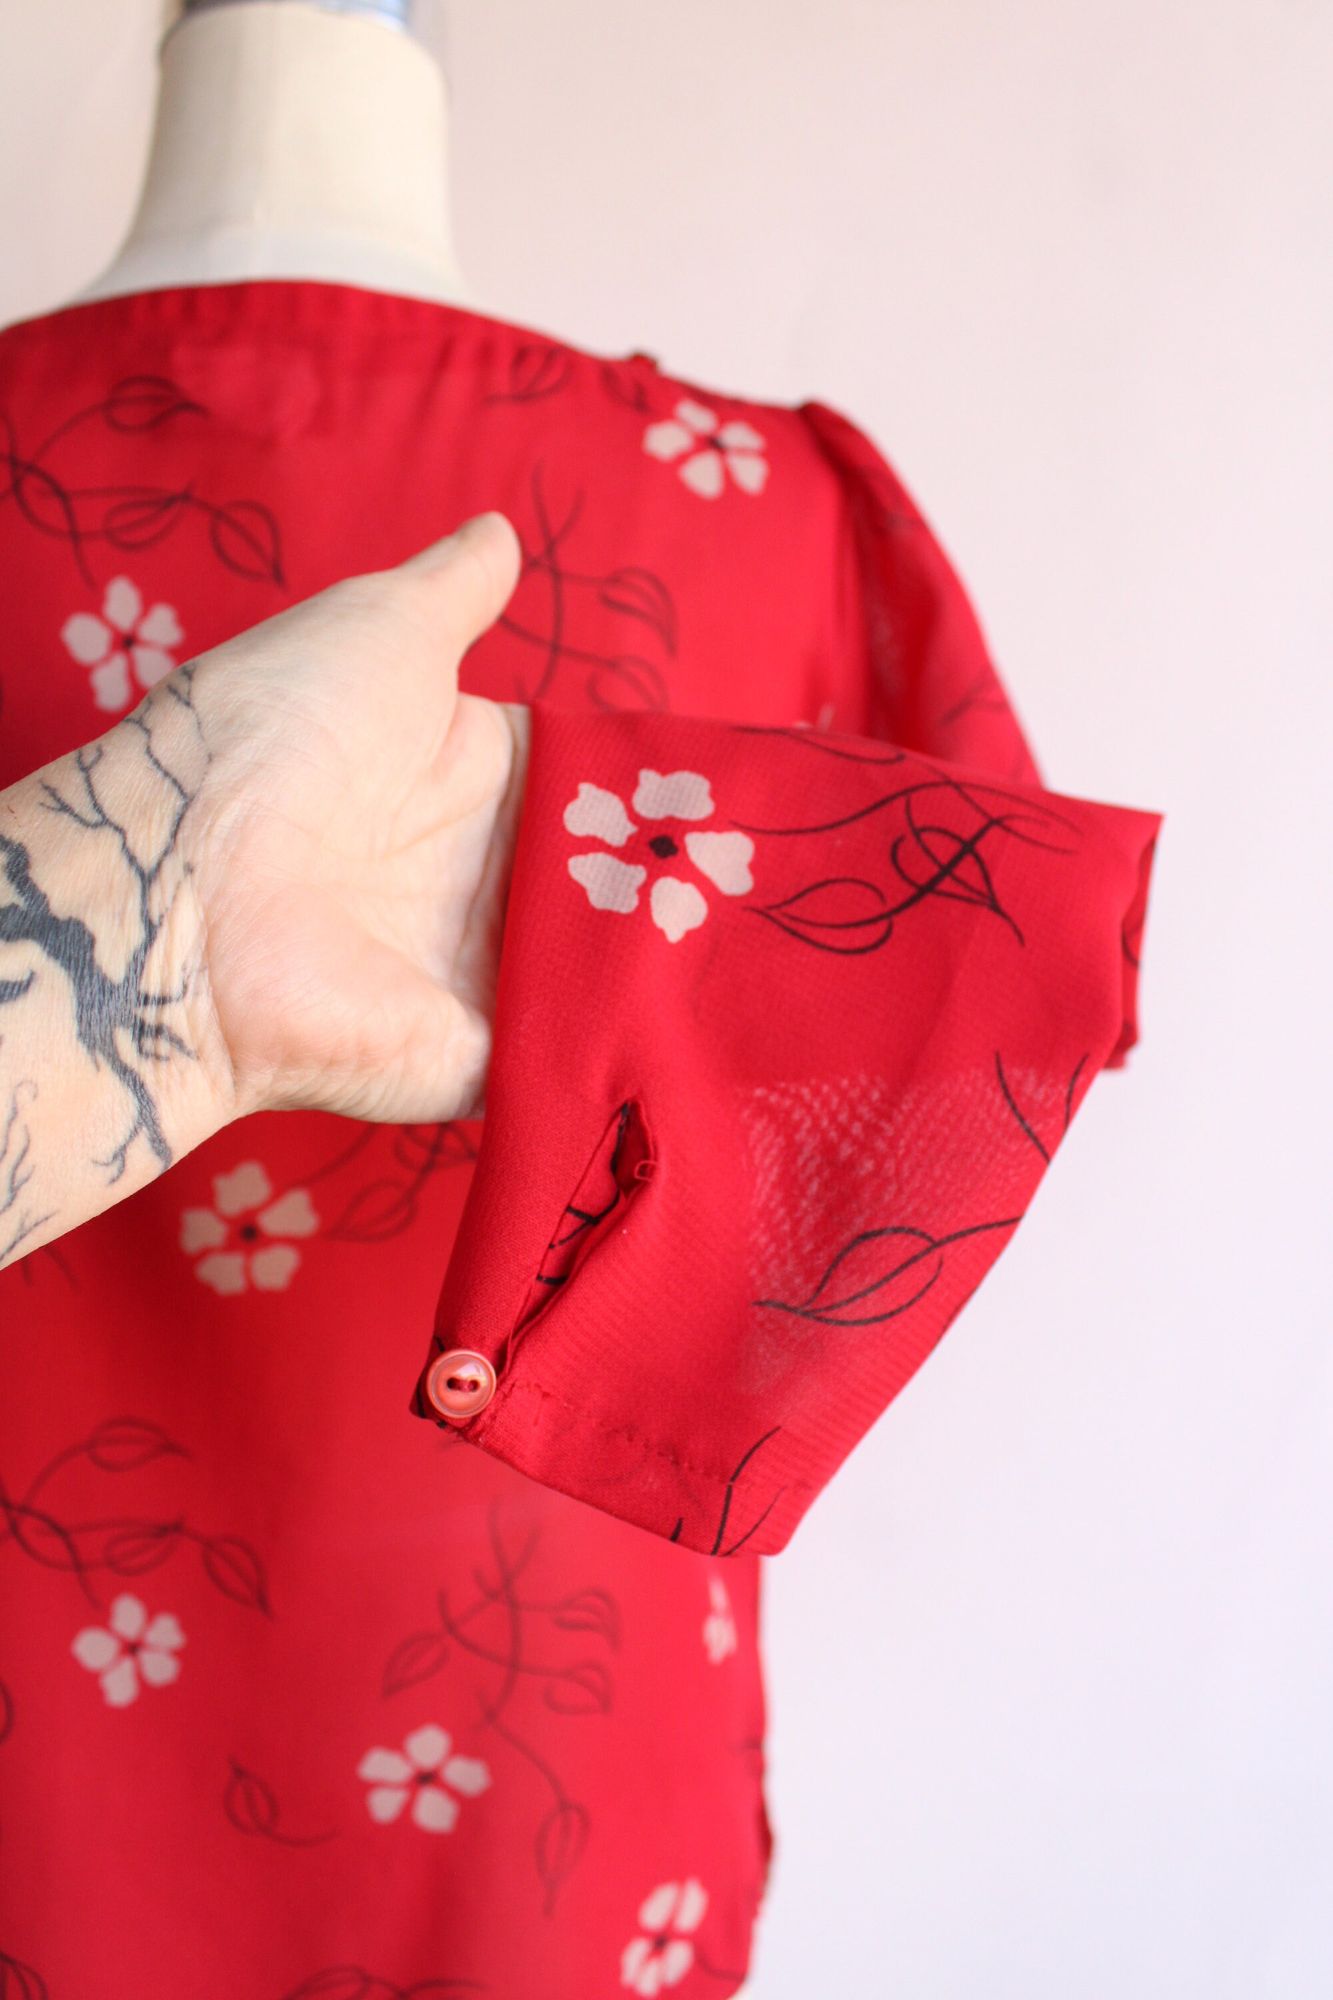 Vintage 1990s 2000s  Red and White Floral Print Blouse